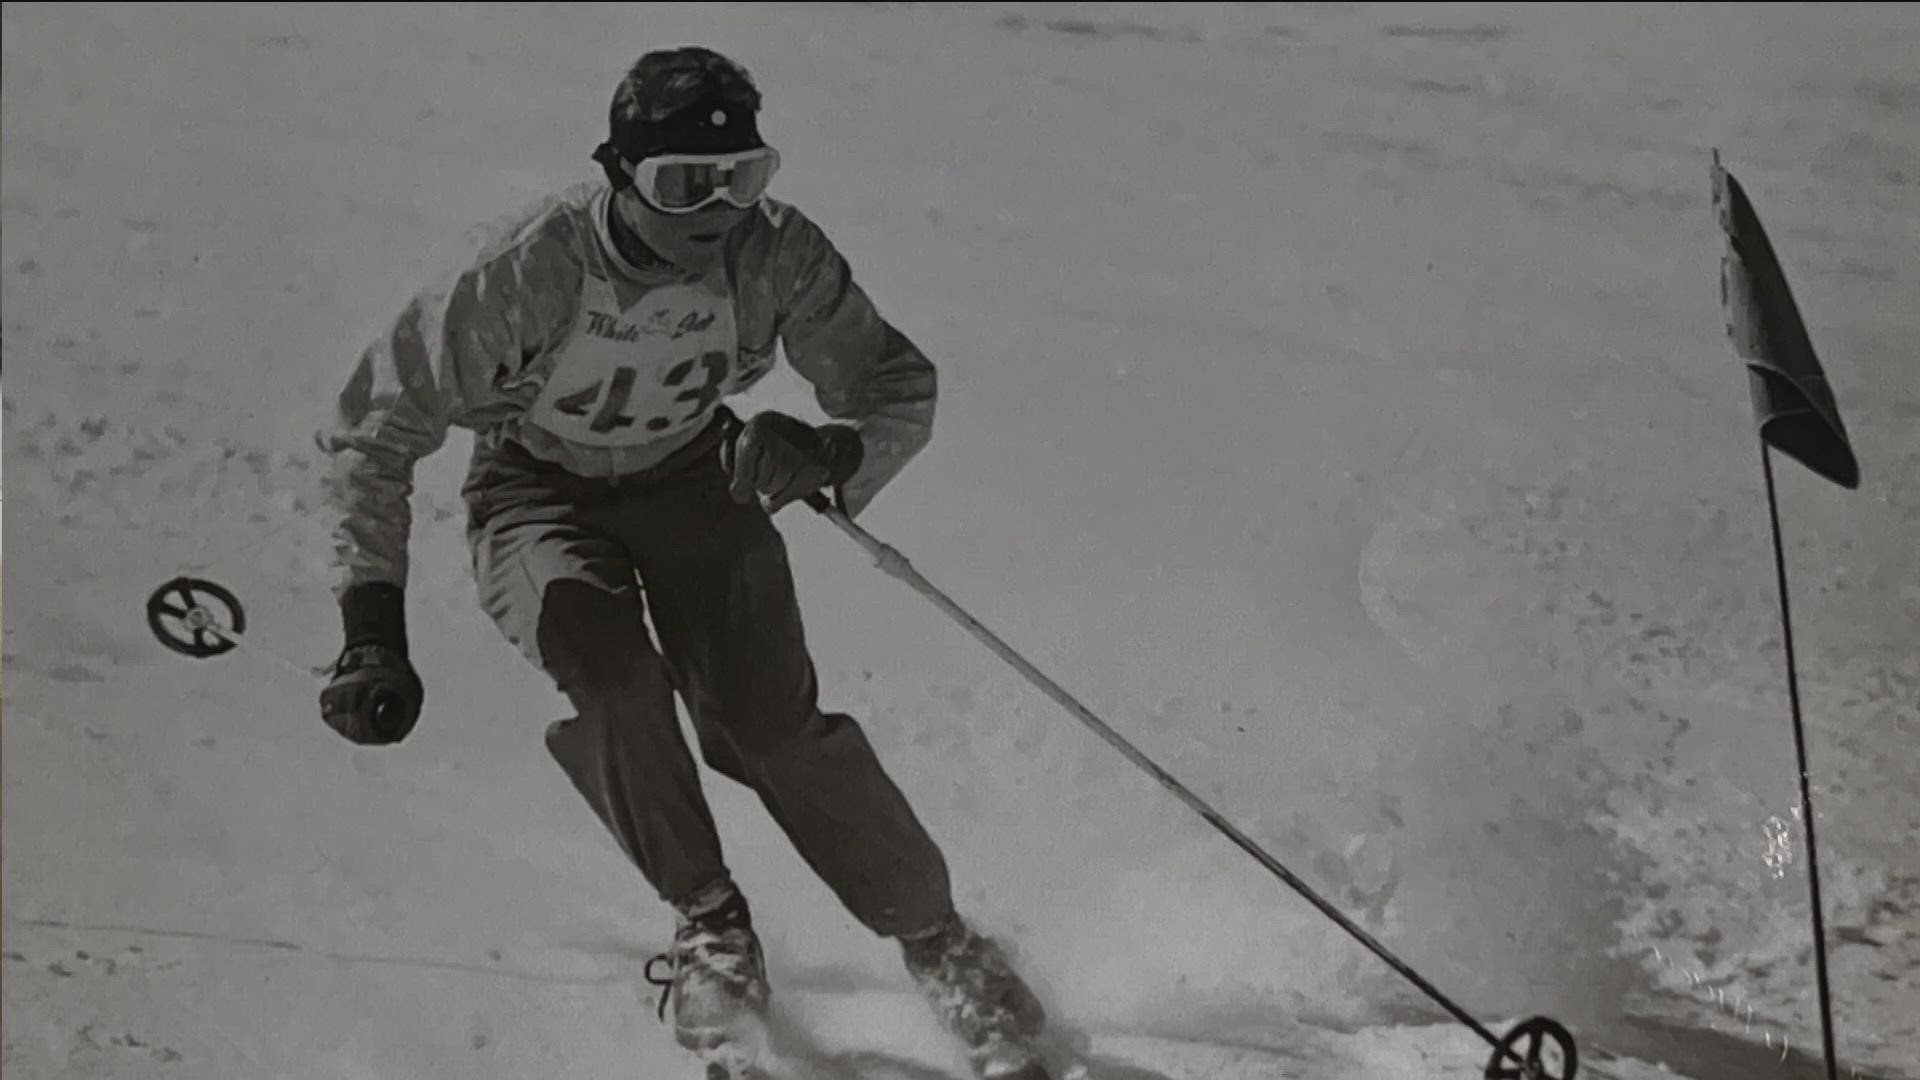 Fifty years ago, well-known competitive skier Gardner Smith went missing. Recently, a body found in the Independence Pass area of Colorado was identified as Gardner.